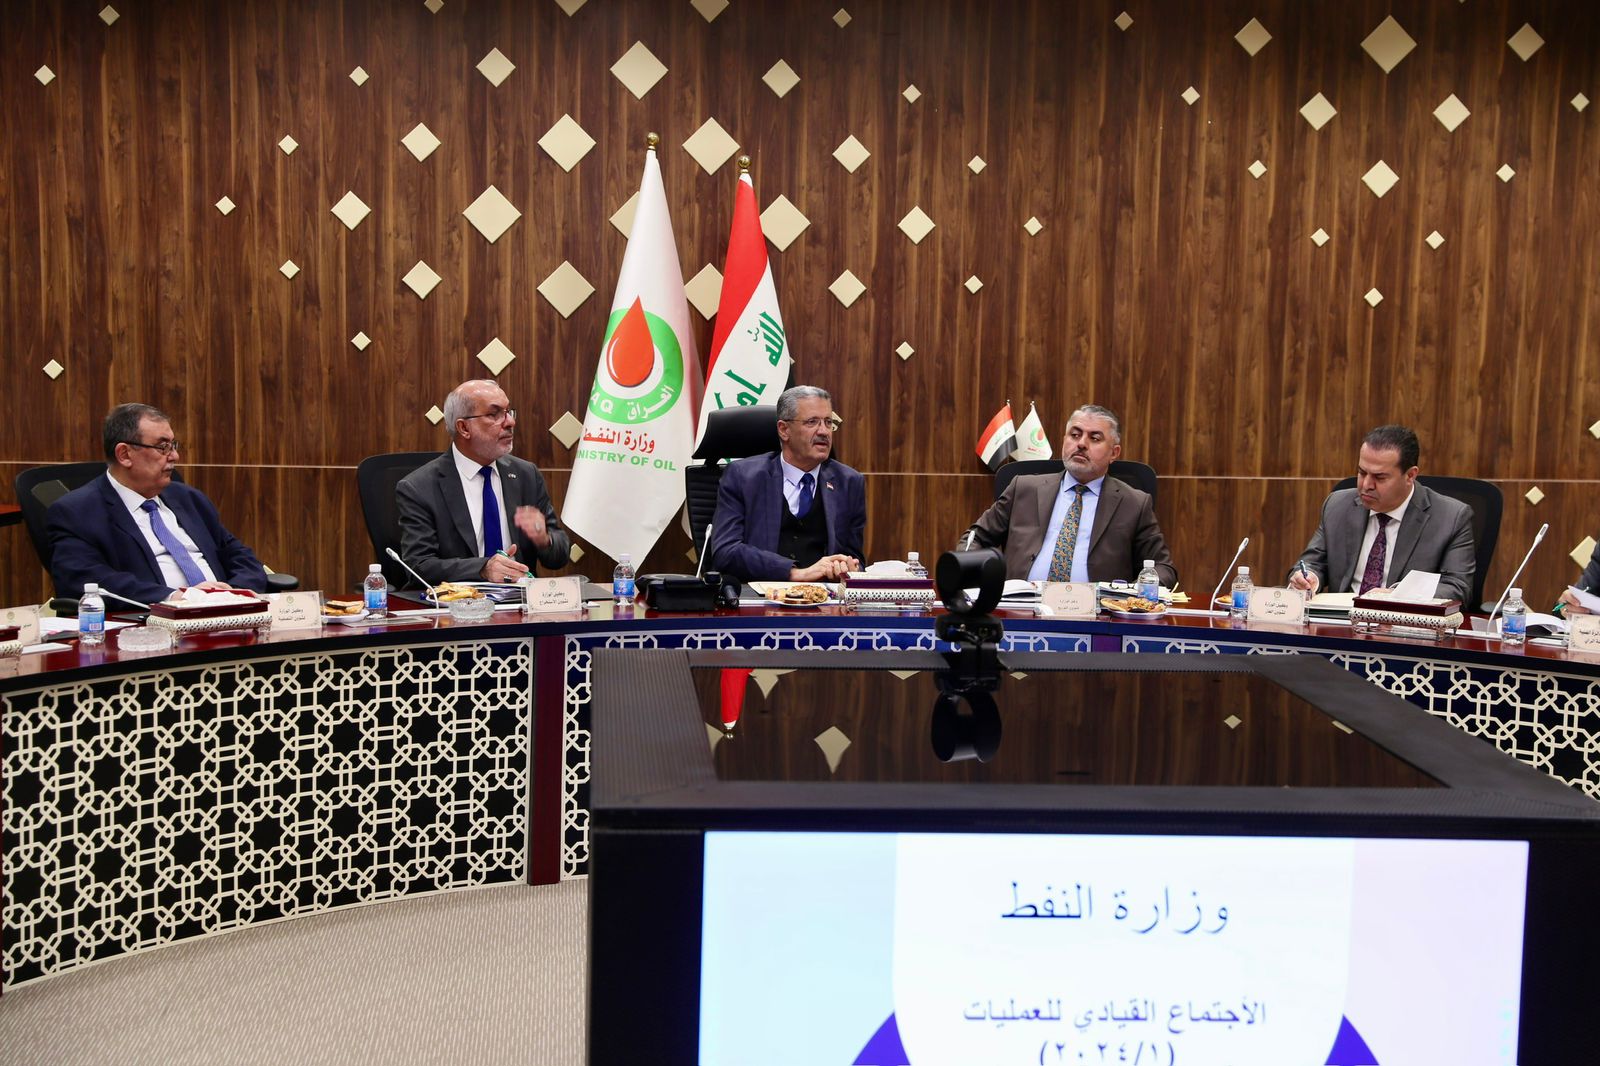 Iraq aims to achieve production rate of 6 million oil barrels per day